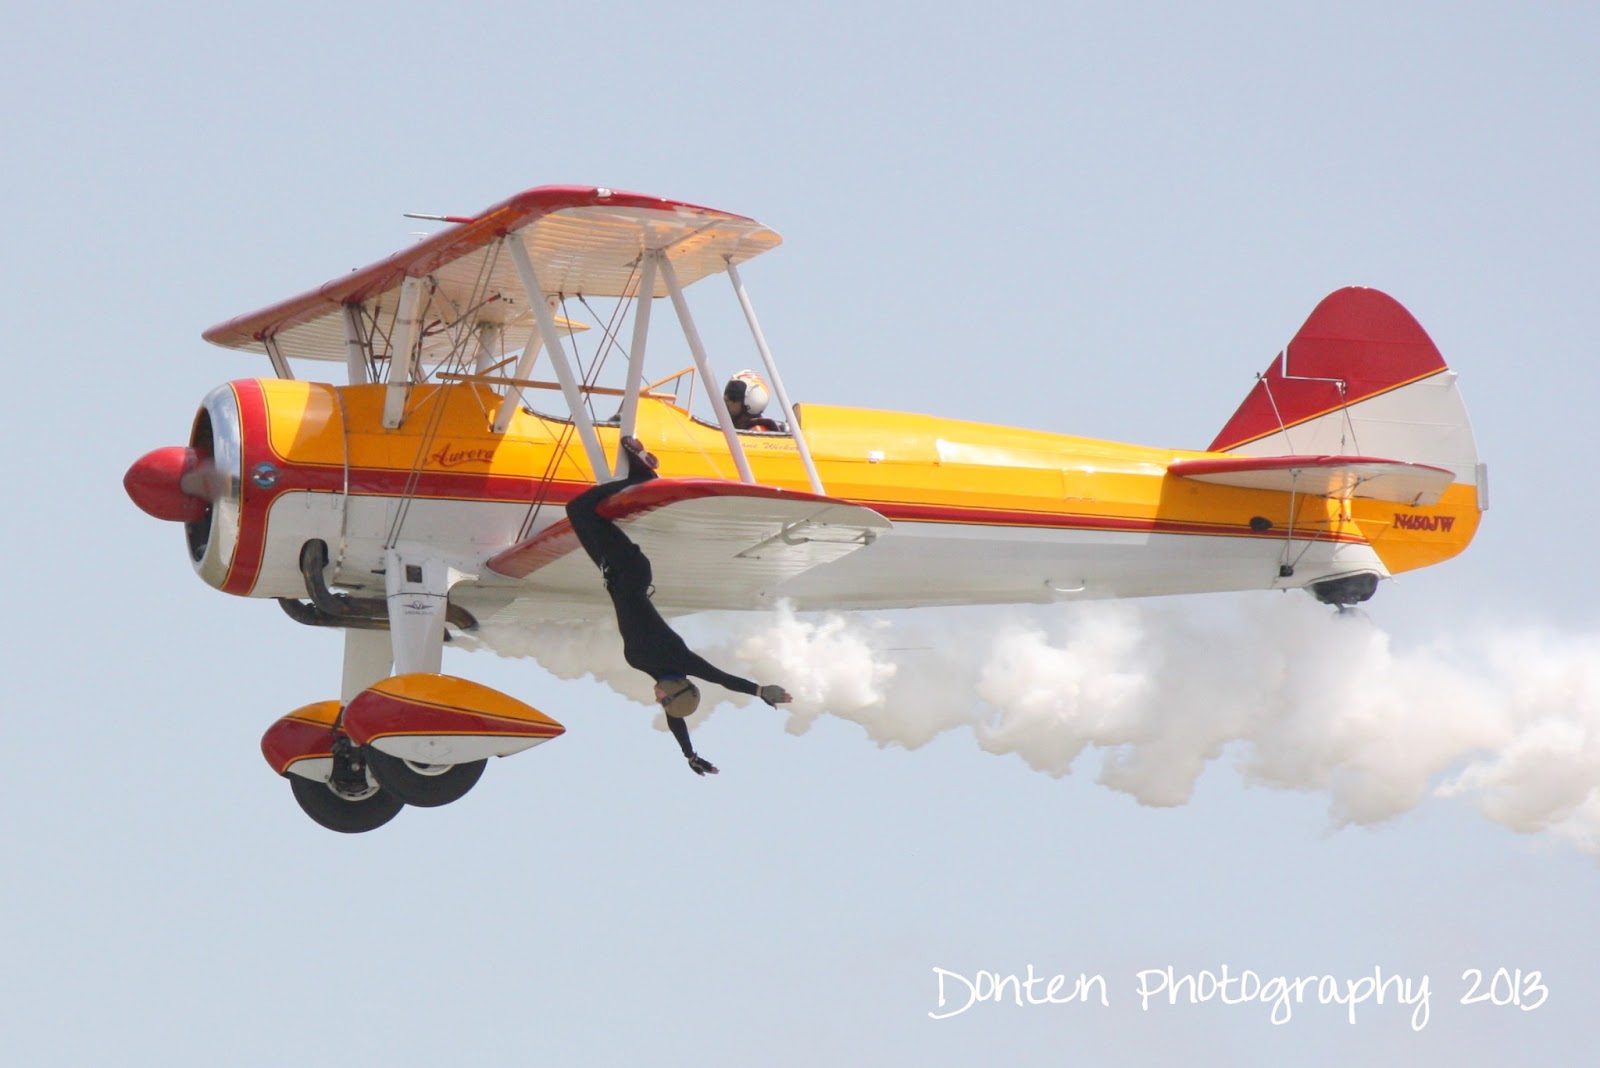 Photo of the Day: Jane Wicker - Wing Walker | Donten Photography